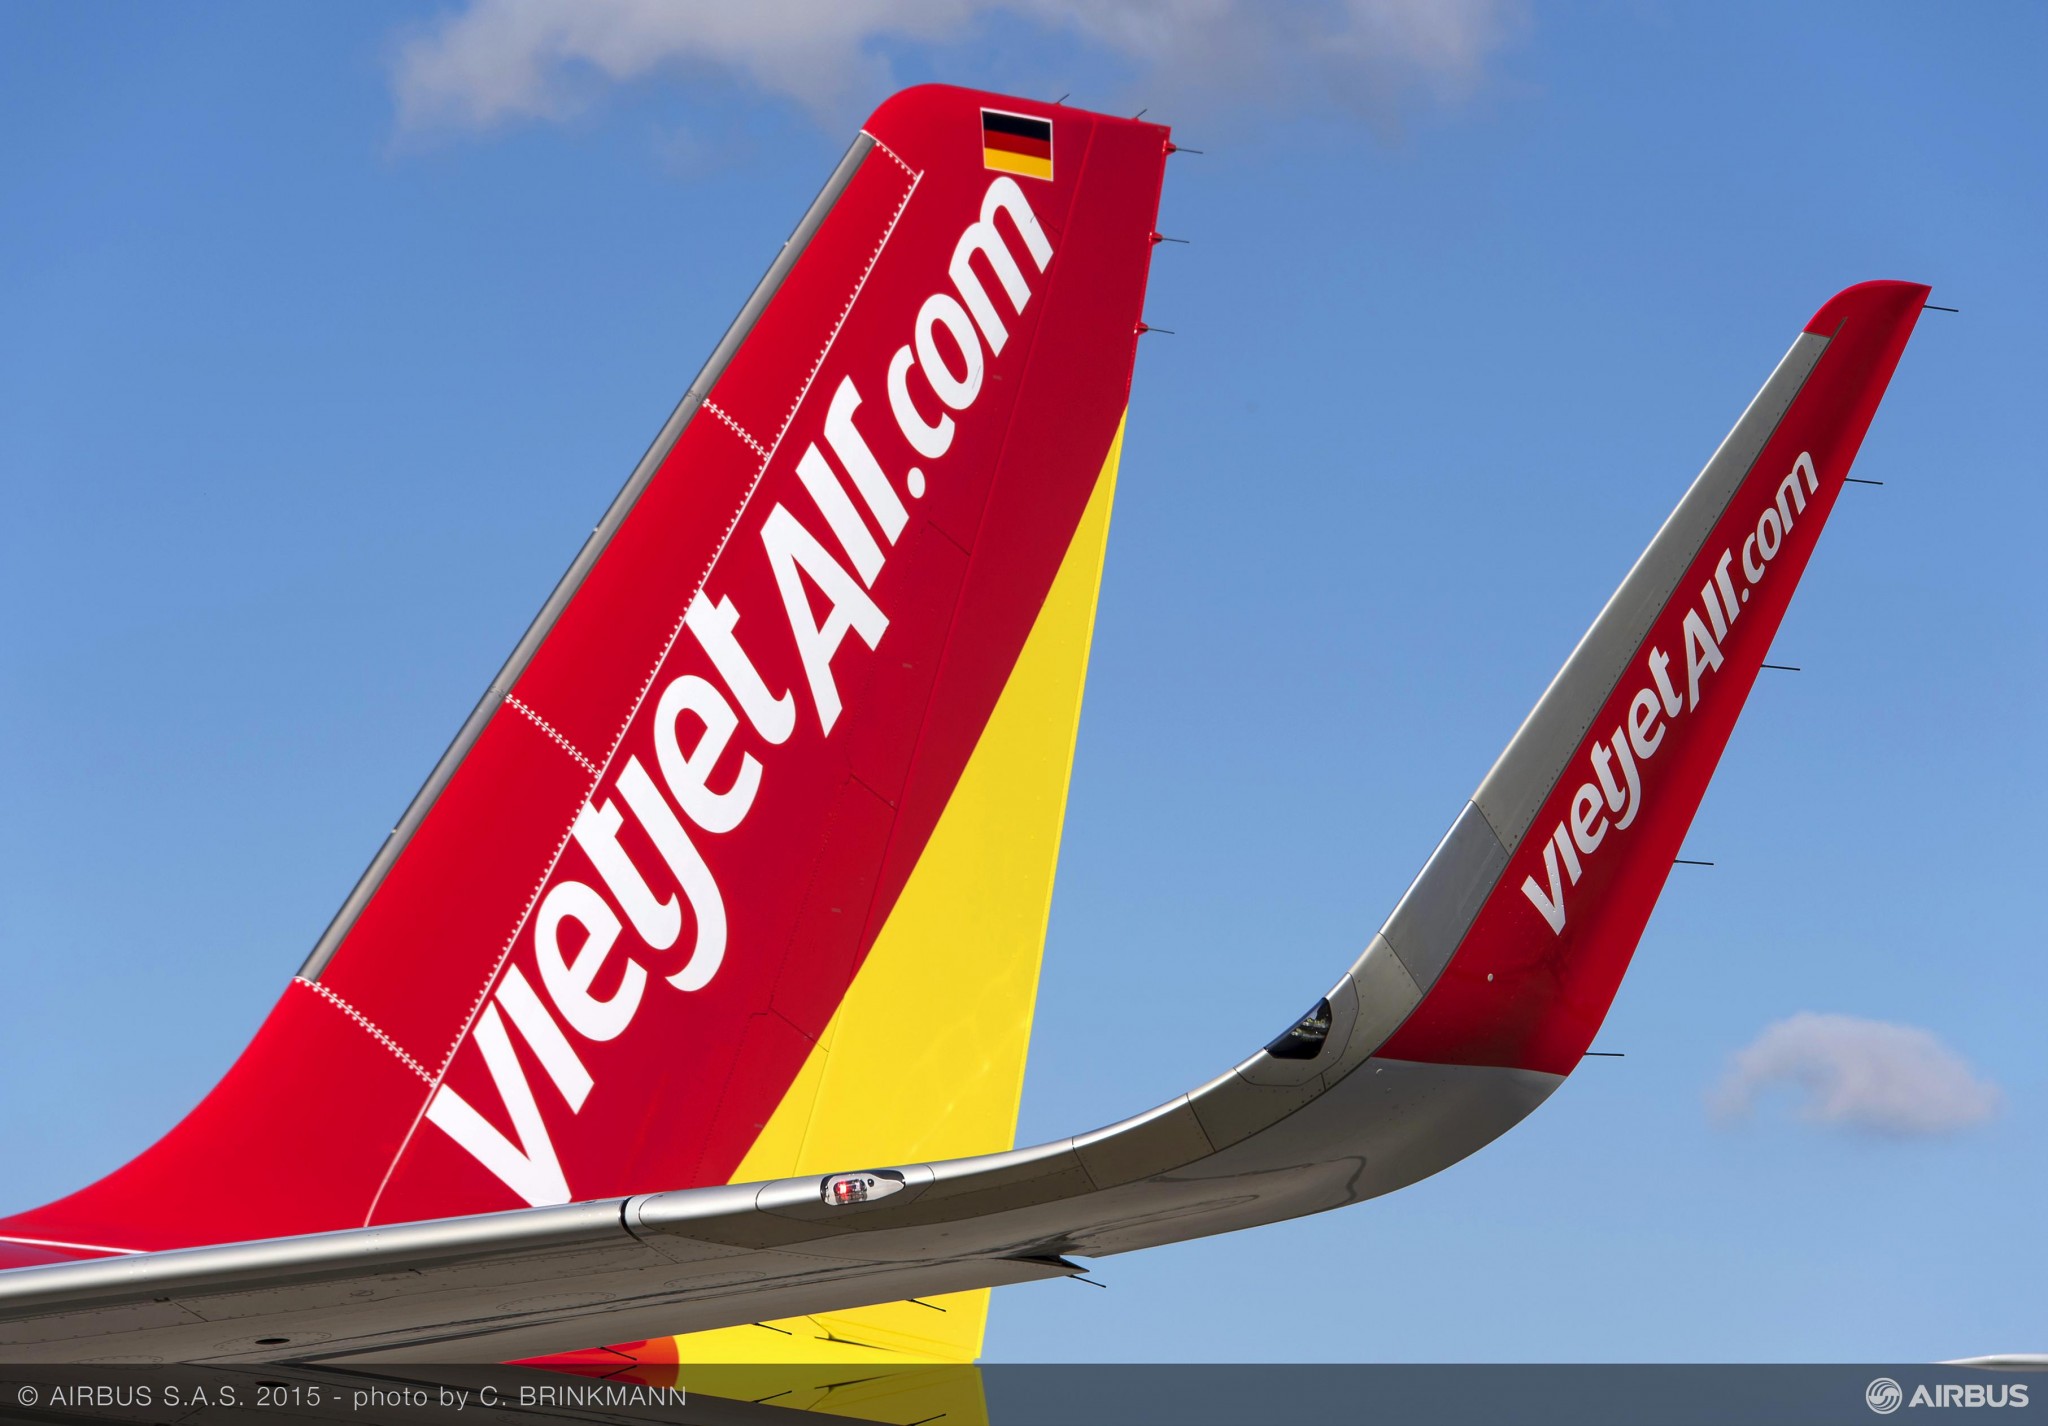 Goshawk delivers its first Airbus A321 NEO to VietJet